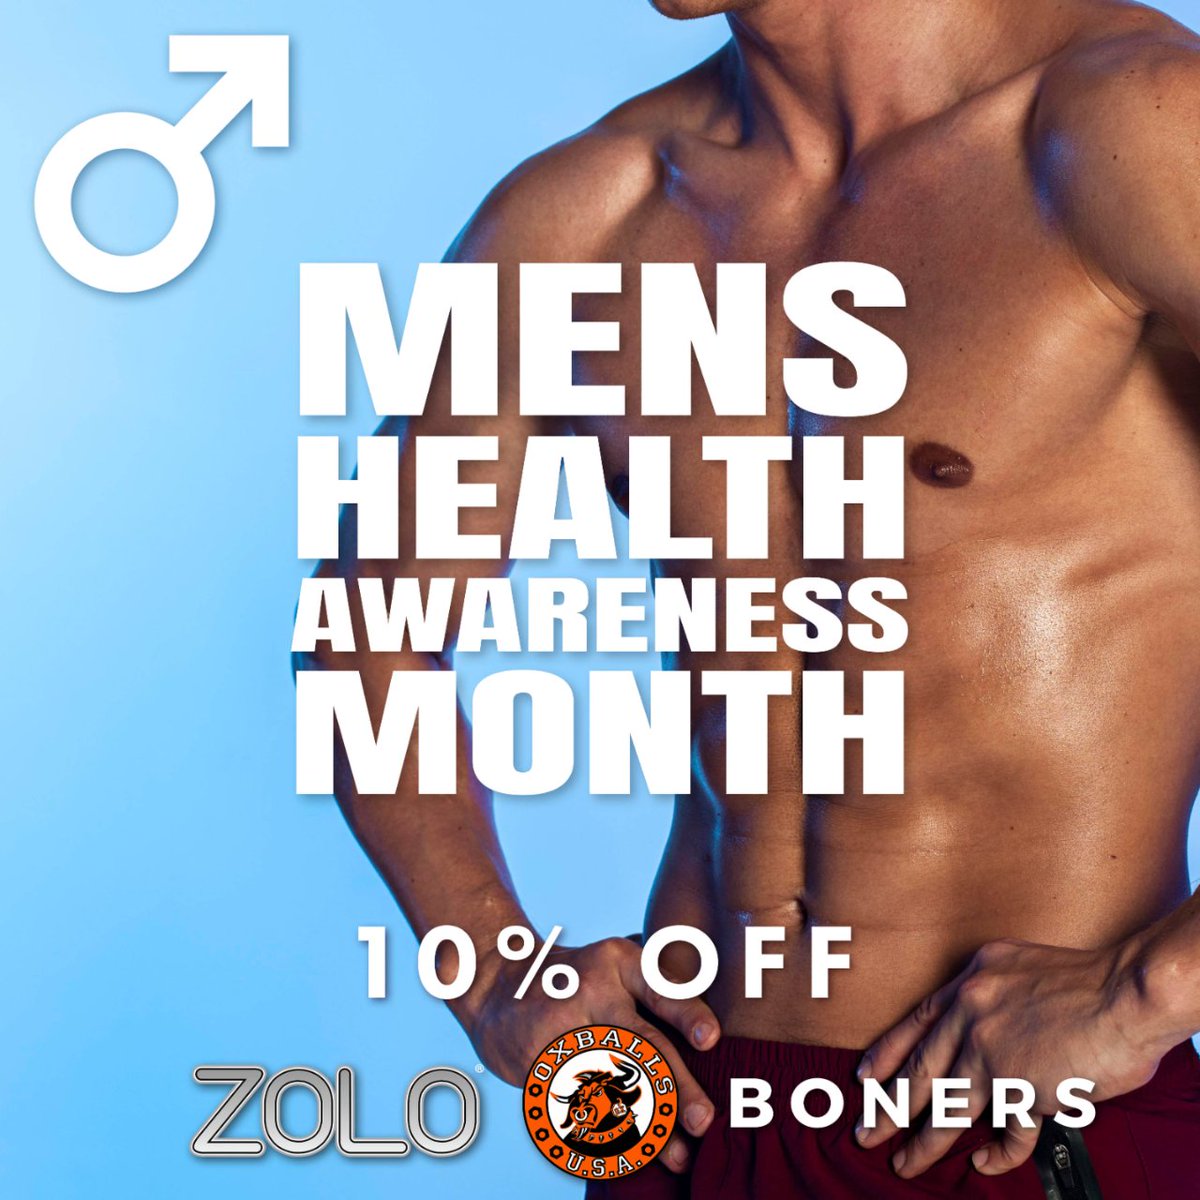 Join us in celebrating Men's Health November! 🙌 Enjoy exclusive discounts this month: 15% off Oxballs, 10% off ZOLO, and 10% off Boners. 💪 Wishing you all great health and happiness. 💙 #MensHealthNovember #SelfCareForHim #MensWellness #SimplyPleasure